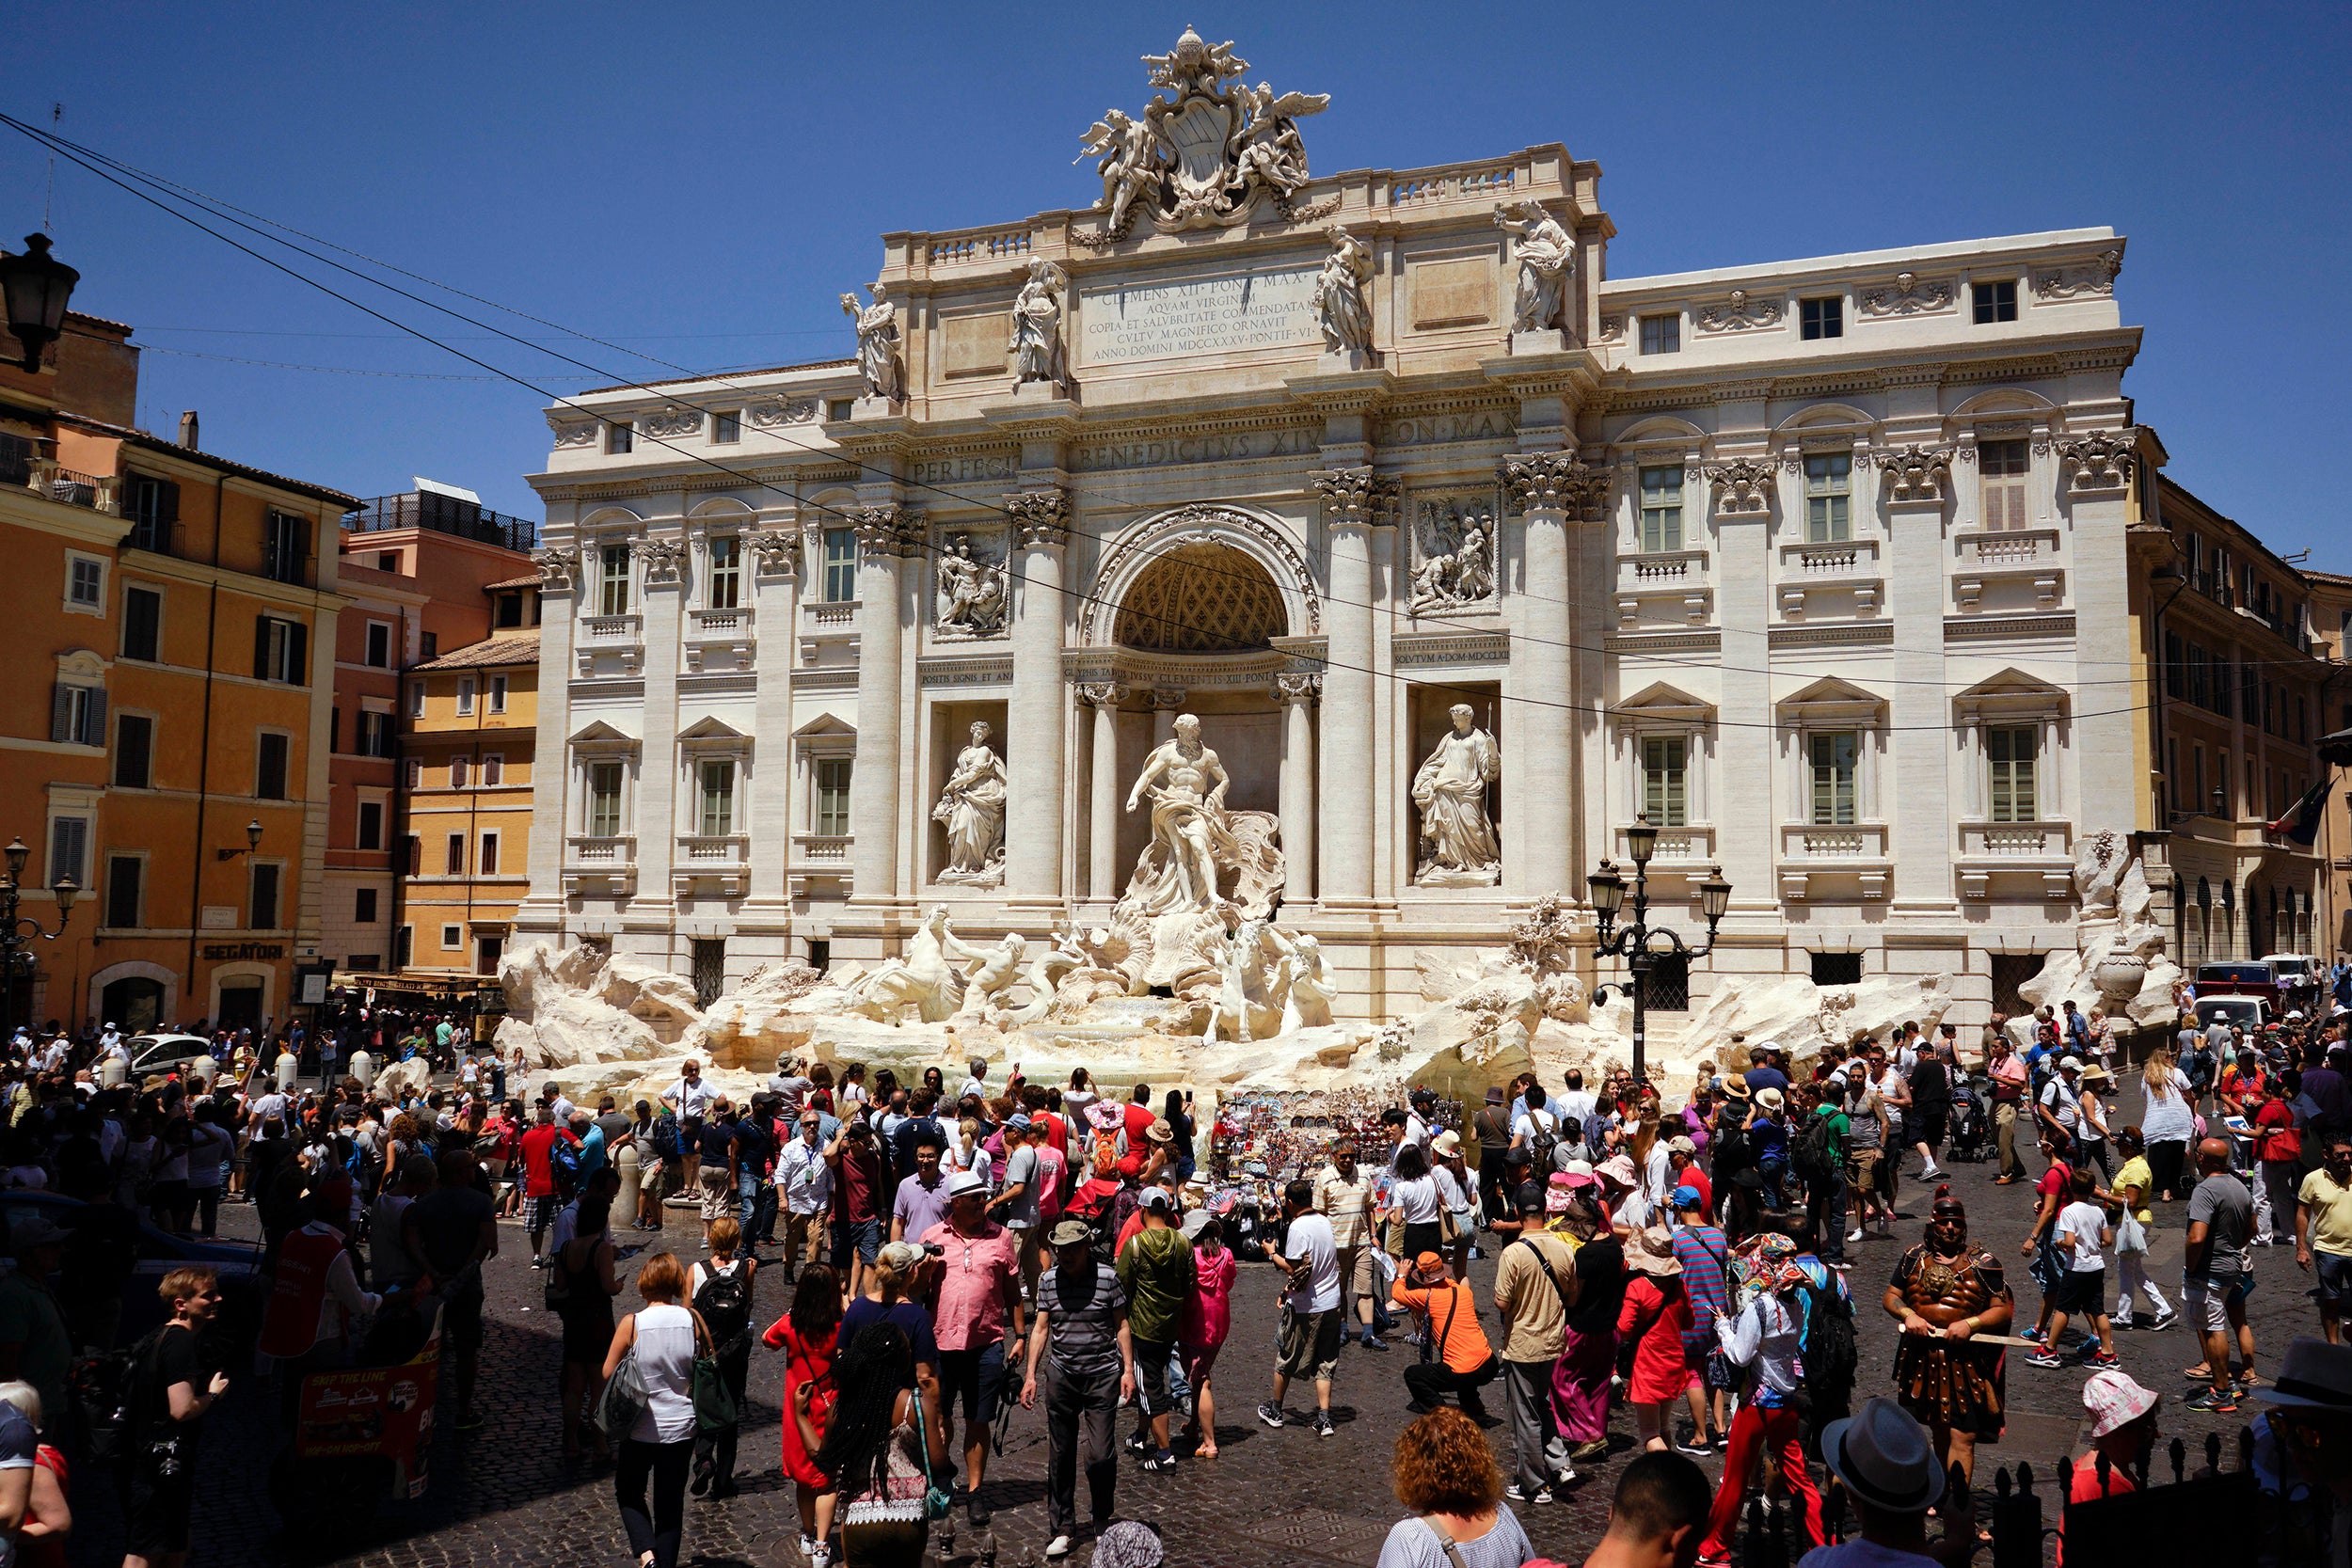 Rome’s mayor is resisting a cap on tourist numbers at the city’s monuments